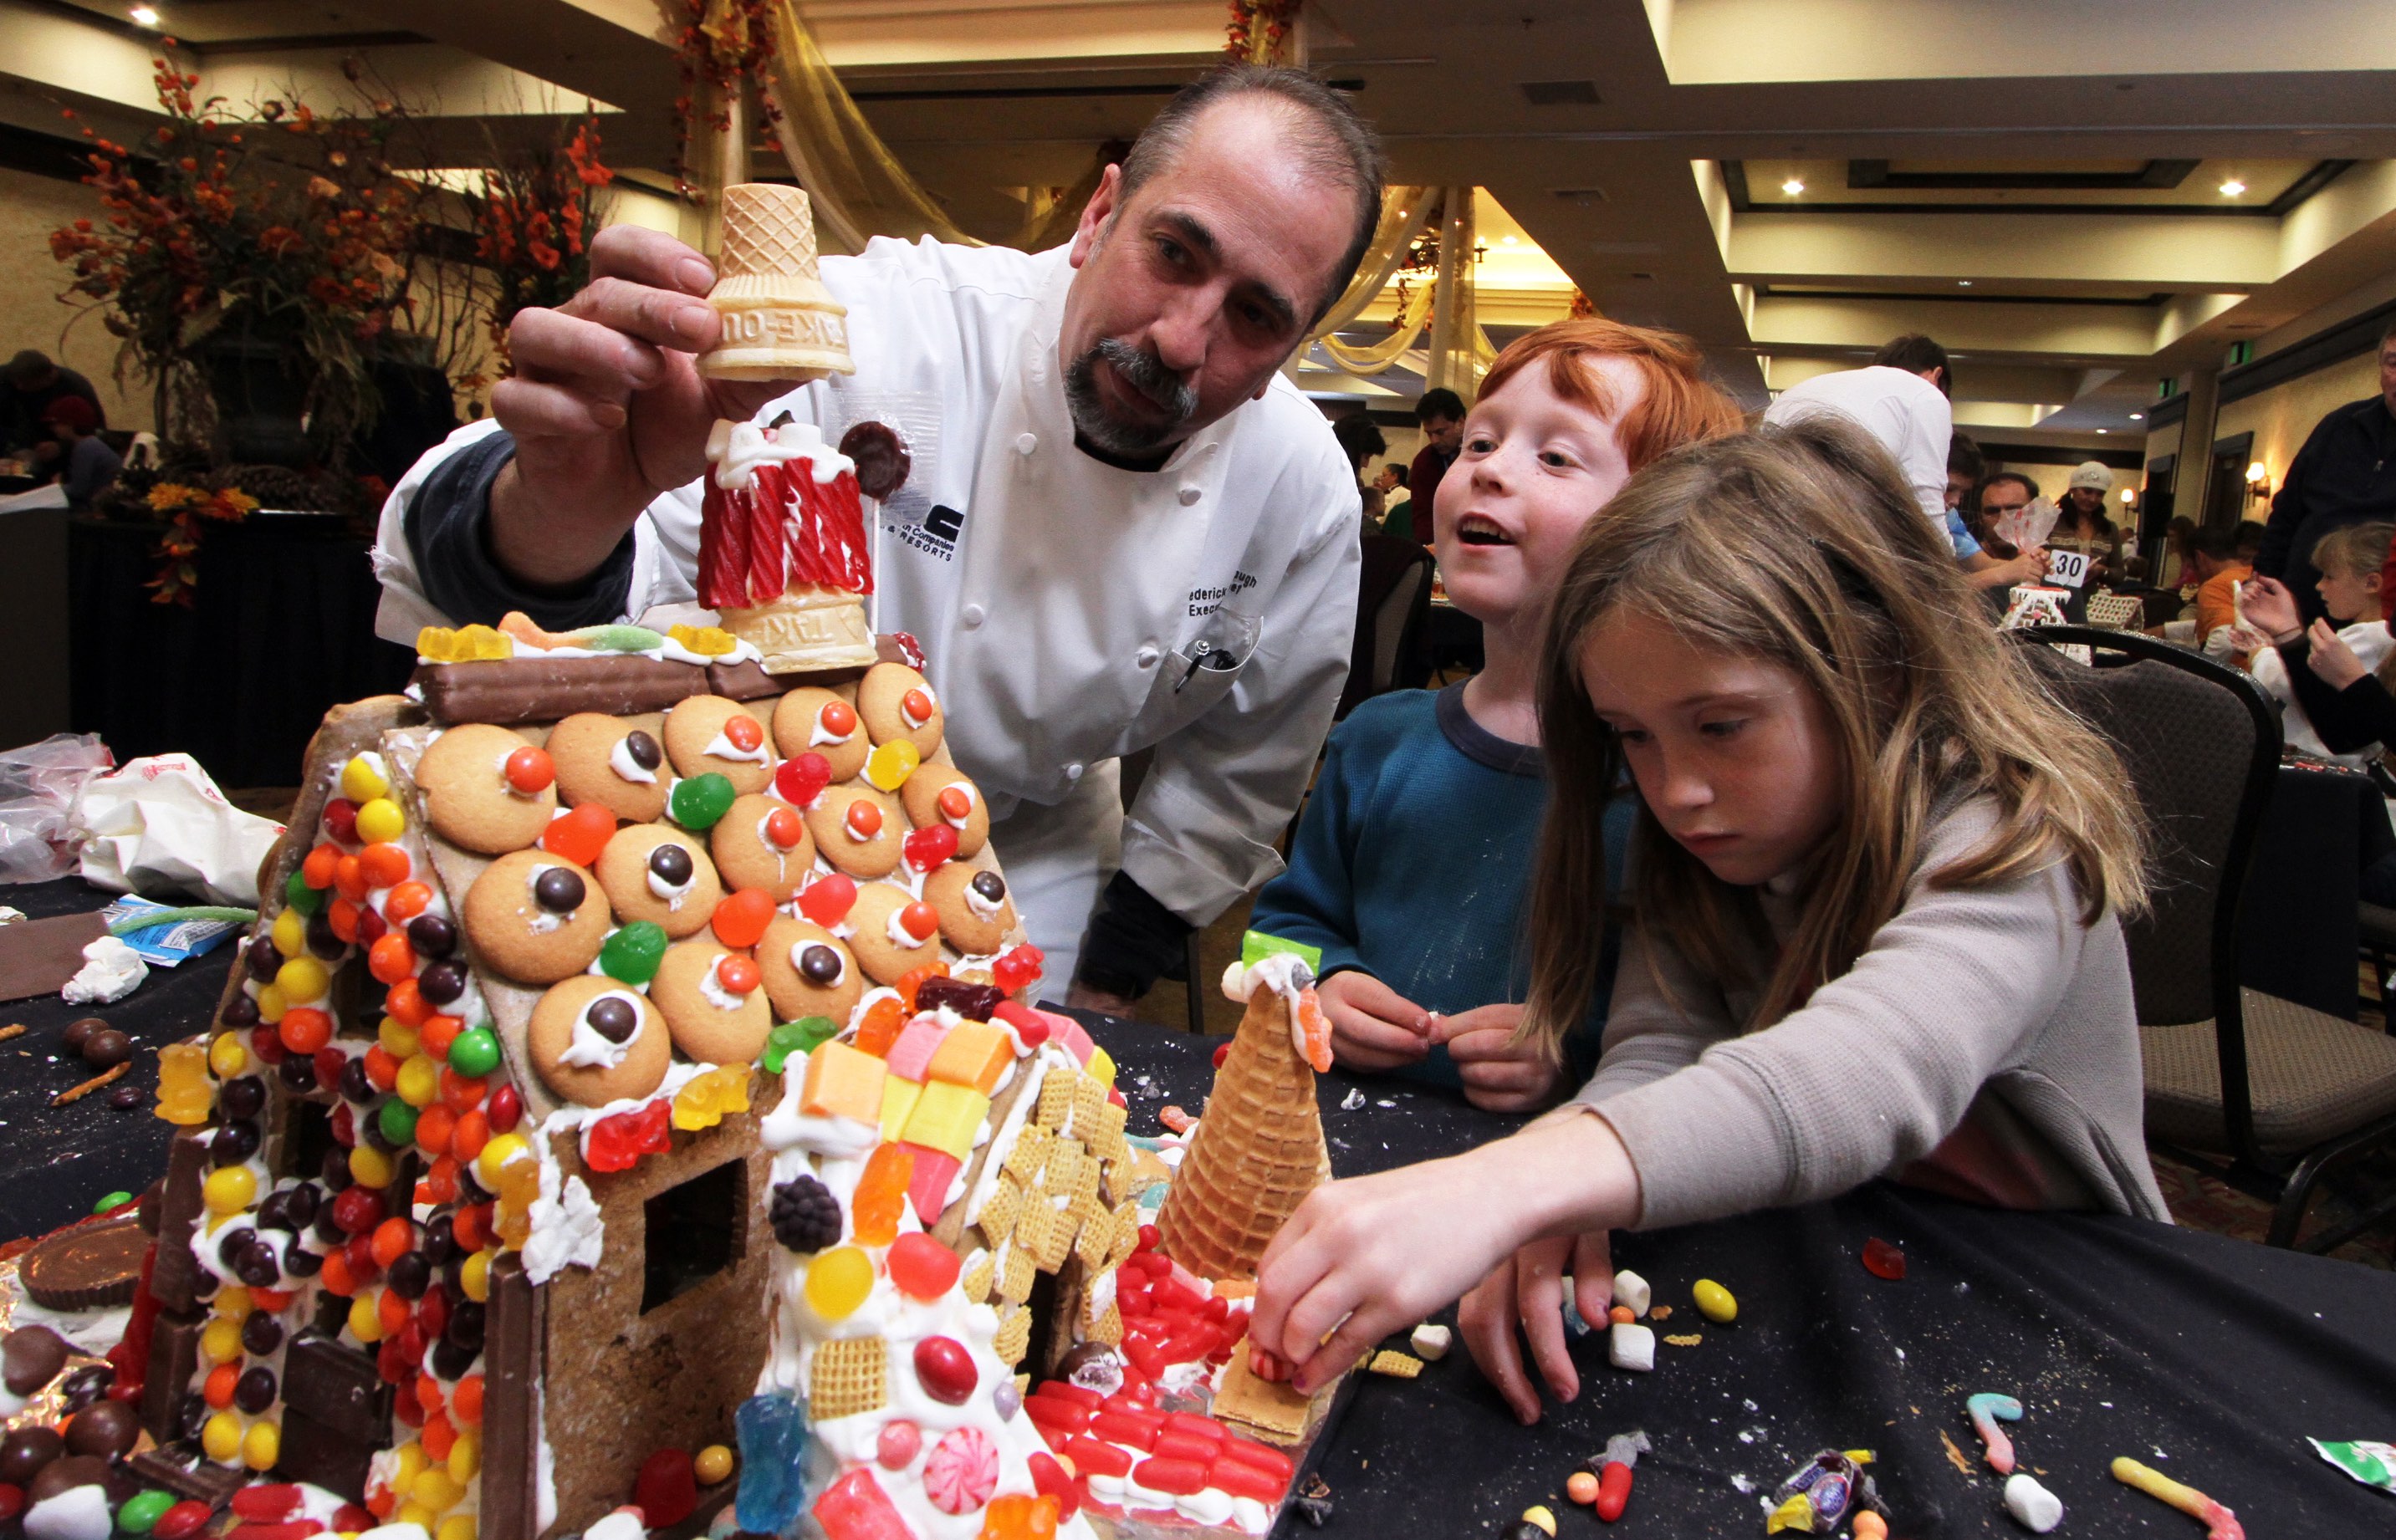 Epic Gingerbread House Workshops are a highlight of the season at Tenaya Lodge.